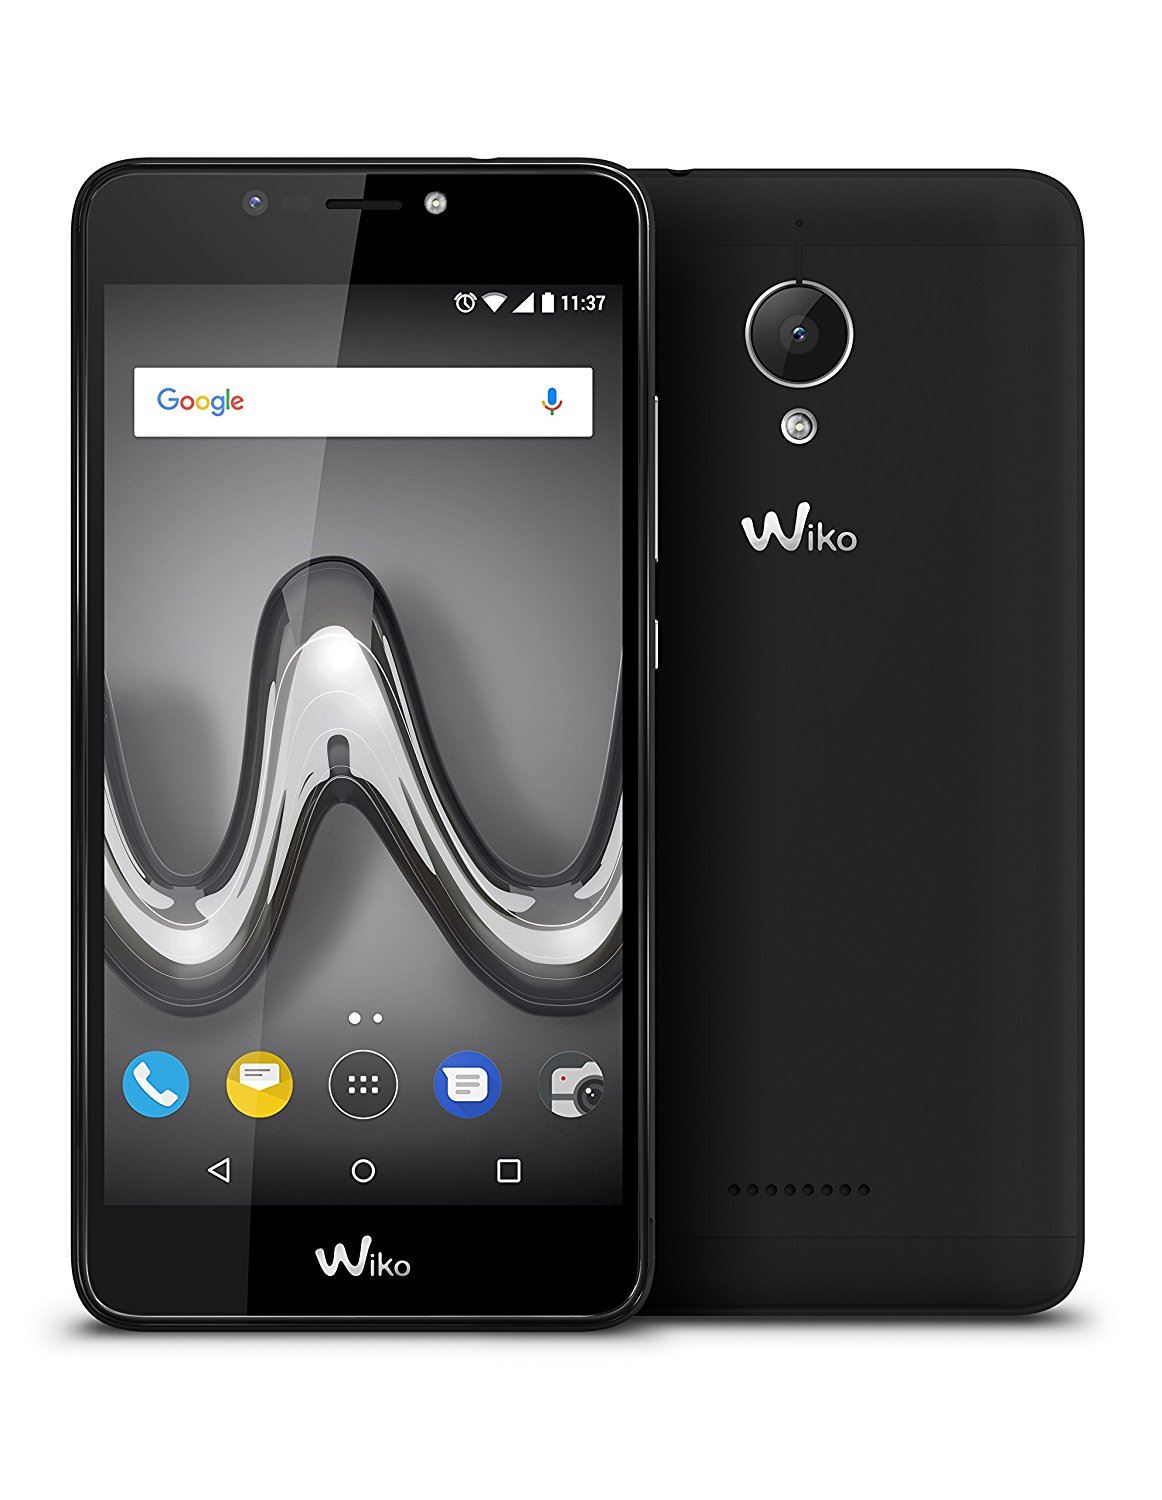 Wiko Tommy2 Plus Factory Reset